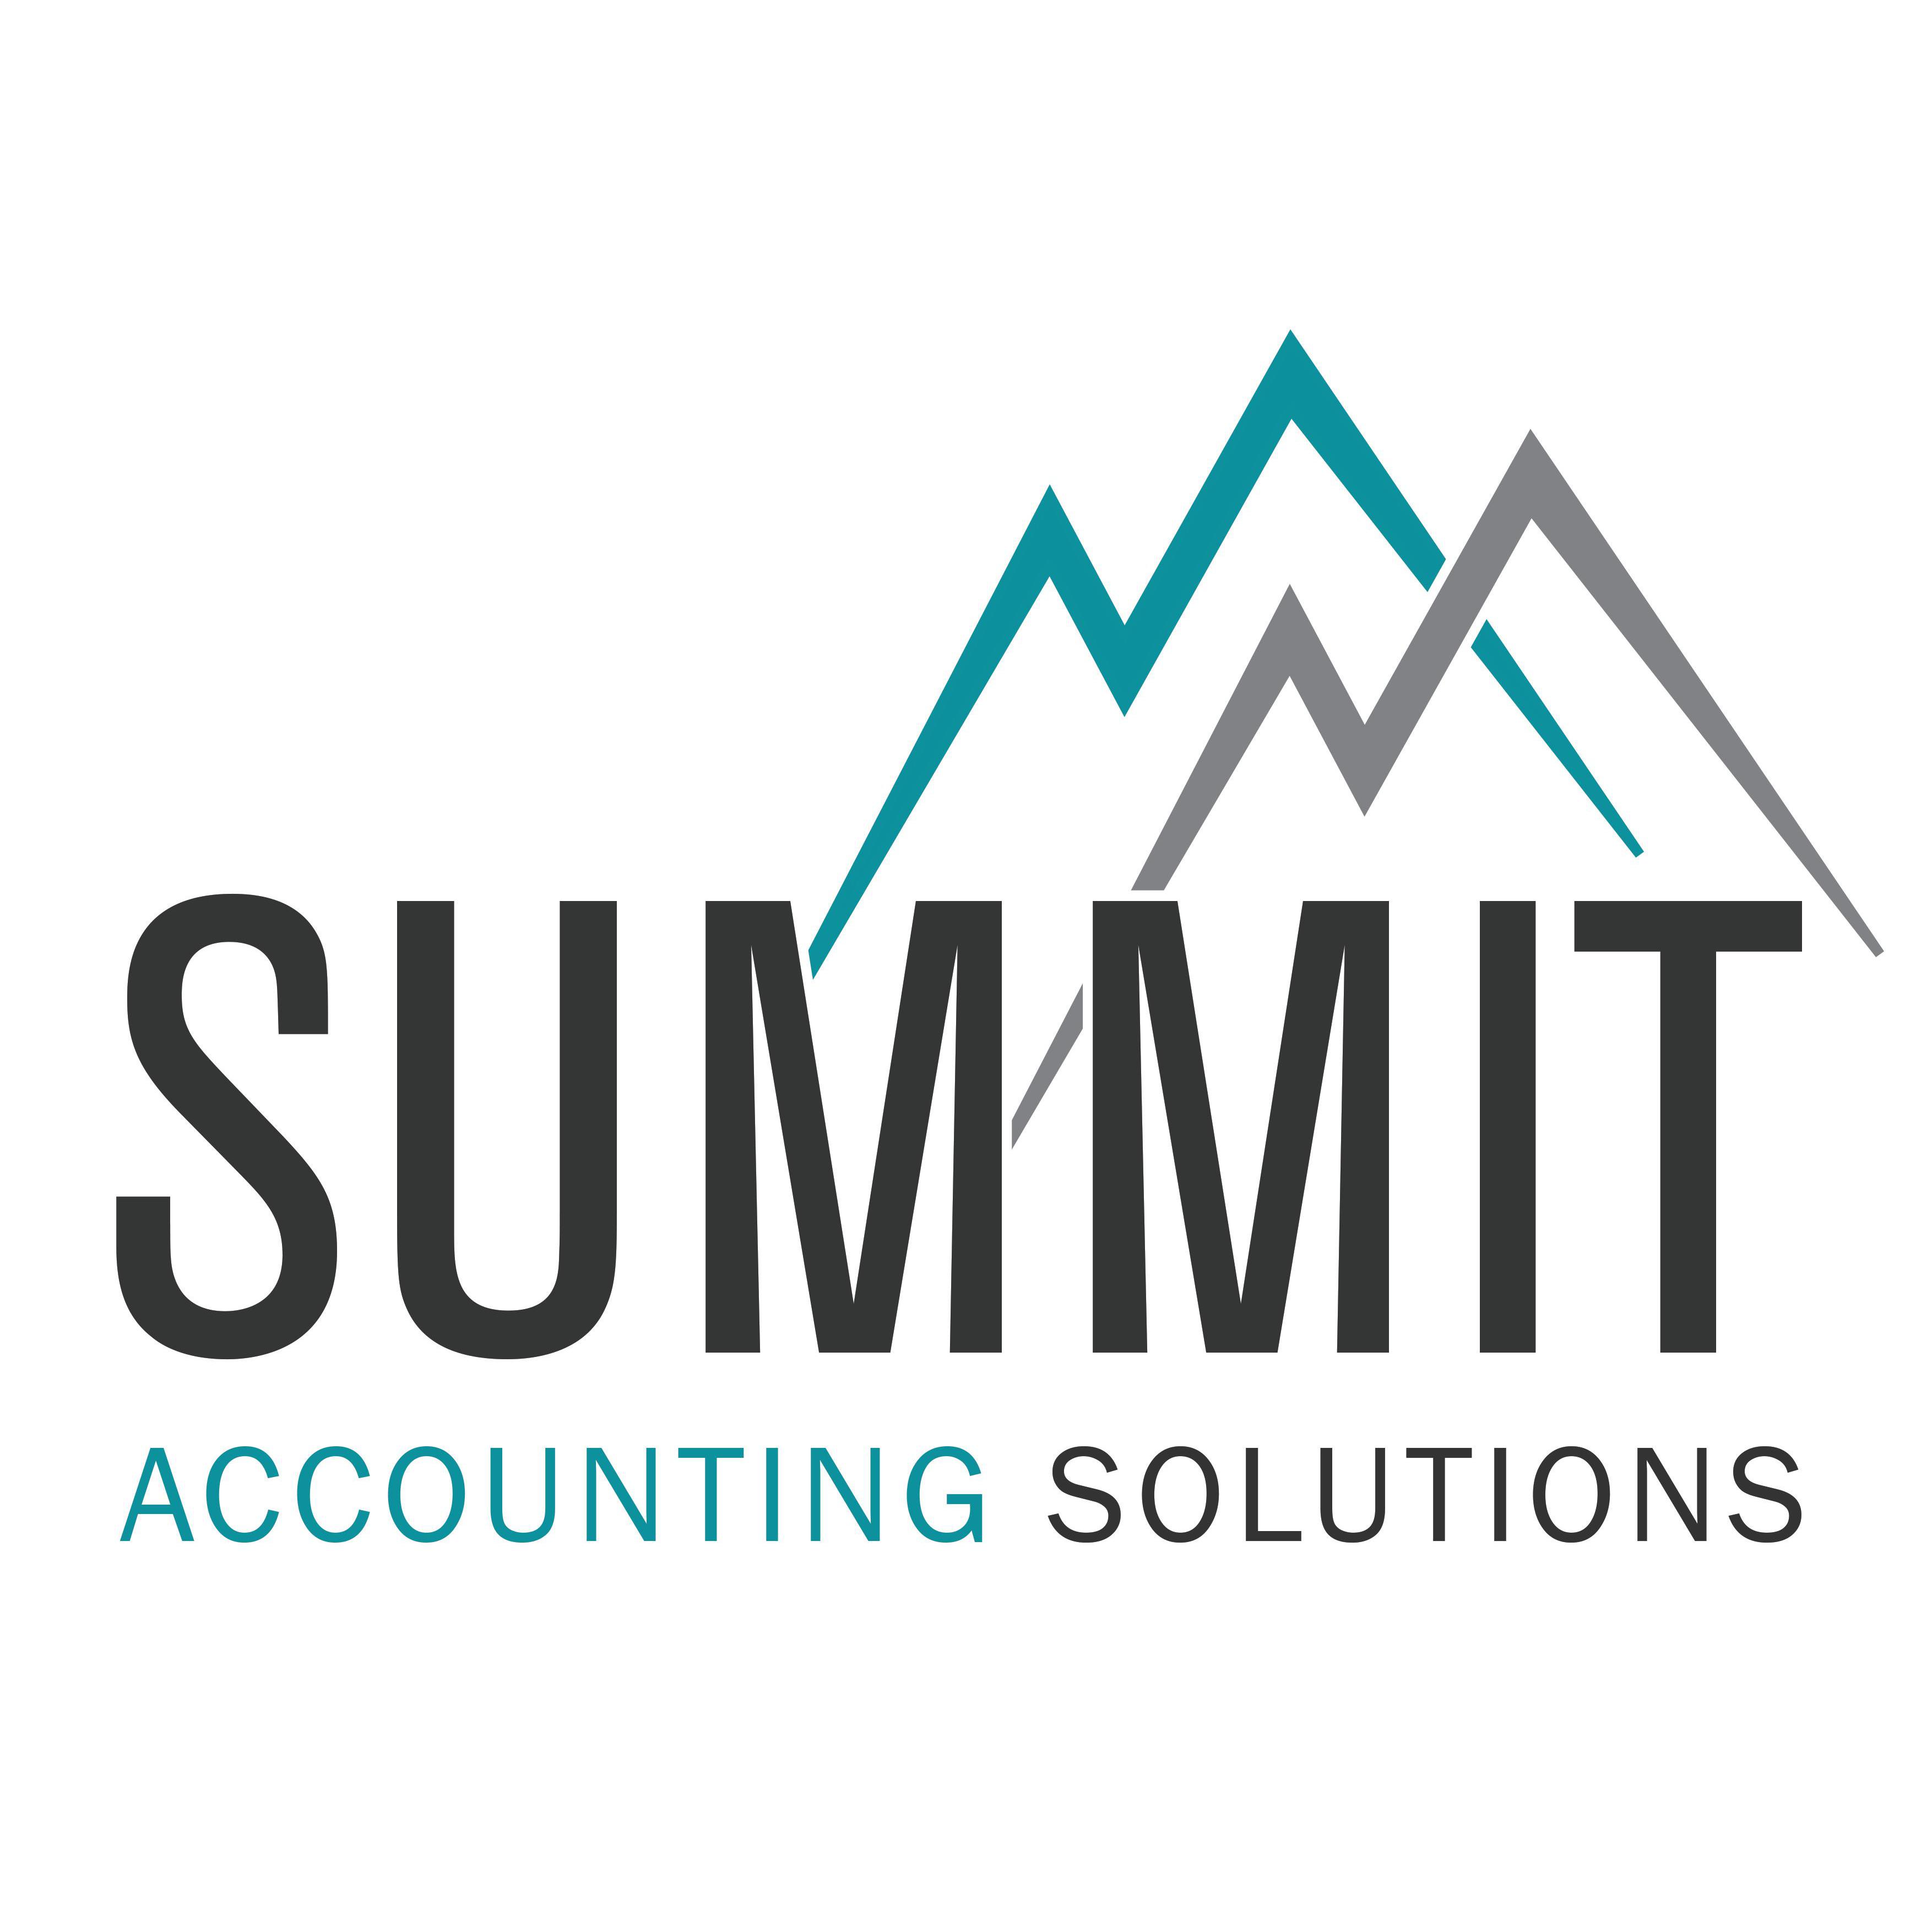 Summit Accounting Solutions - Clare, SA 5453 - (08) 8885 7818 | ShowMeLocal.com